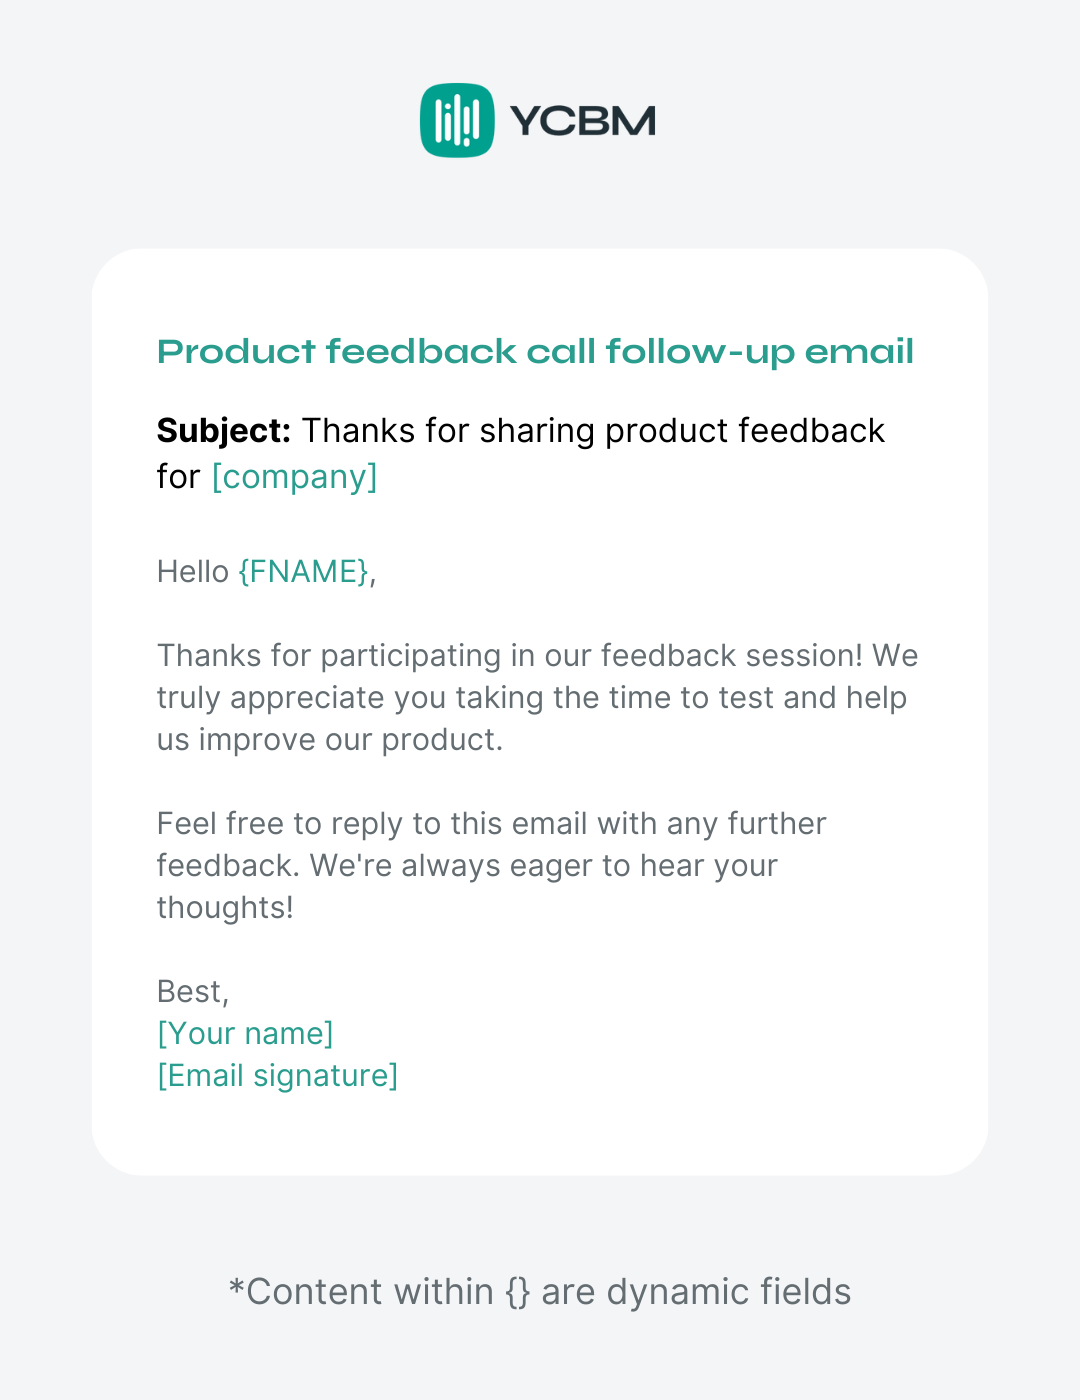 Product feedback follow-up email